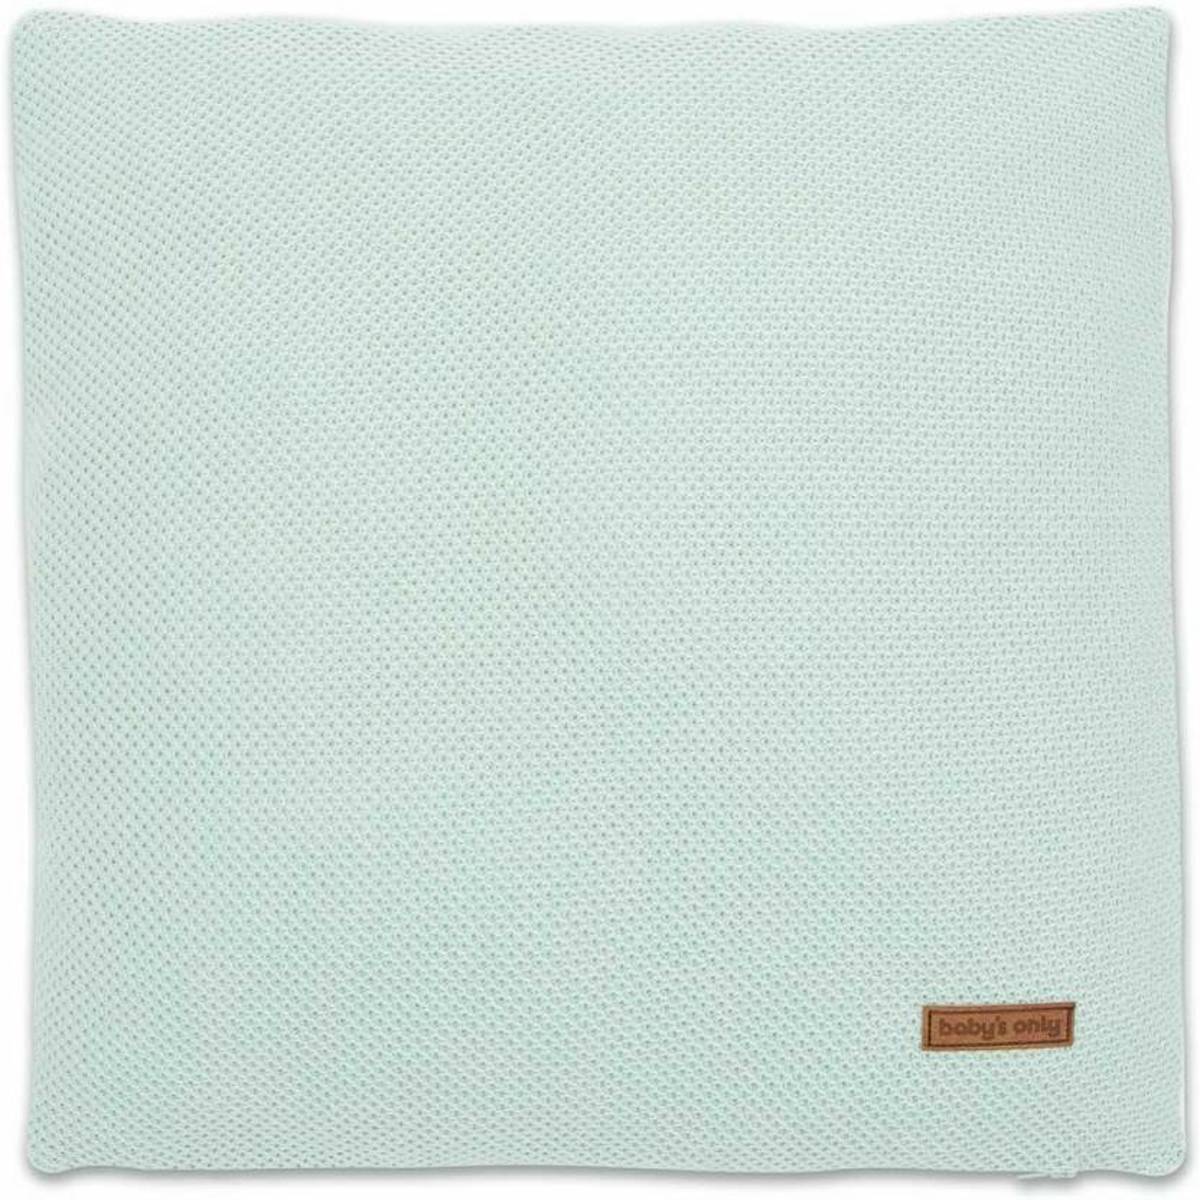 Baby's Only Classic Kussen Mint 40 x 40 cm